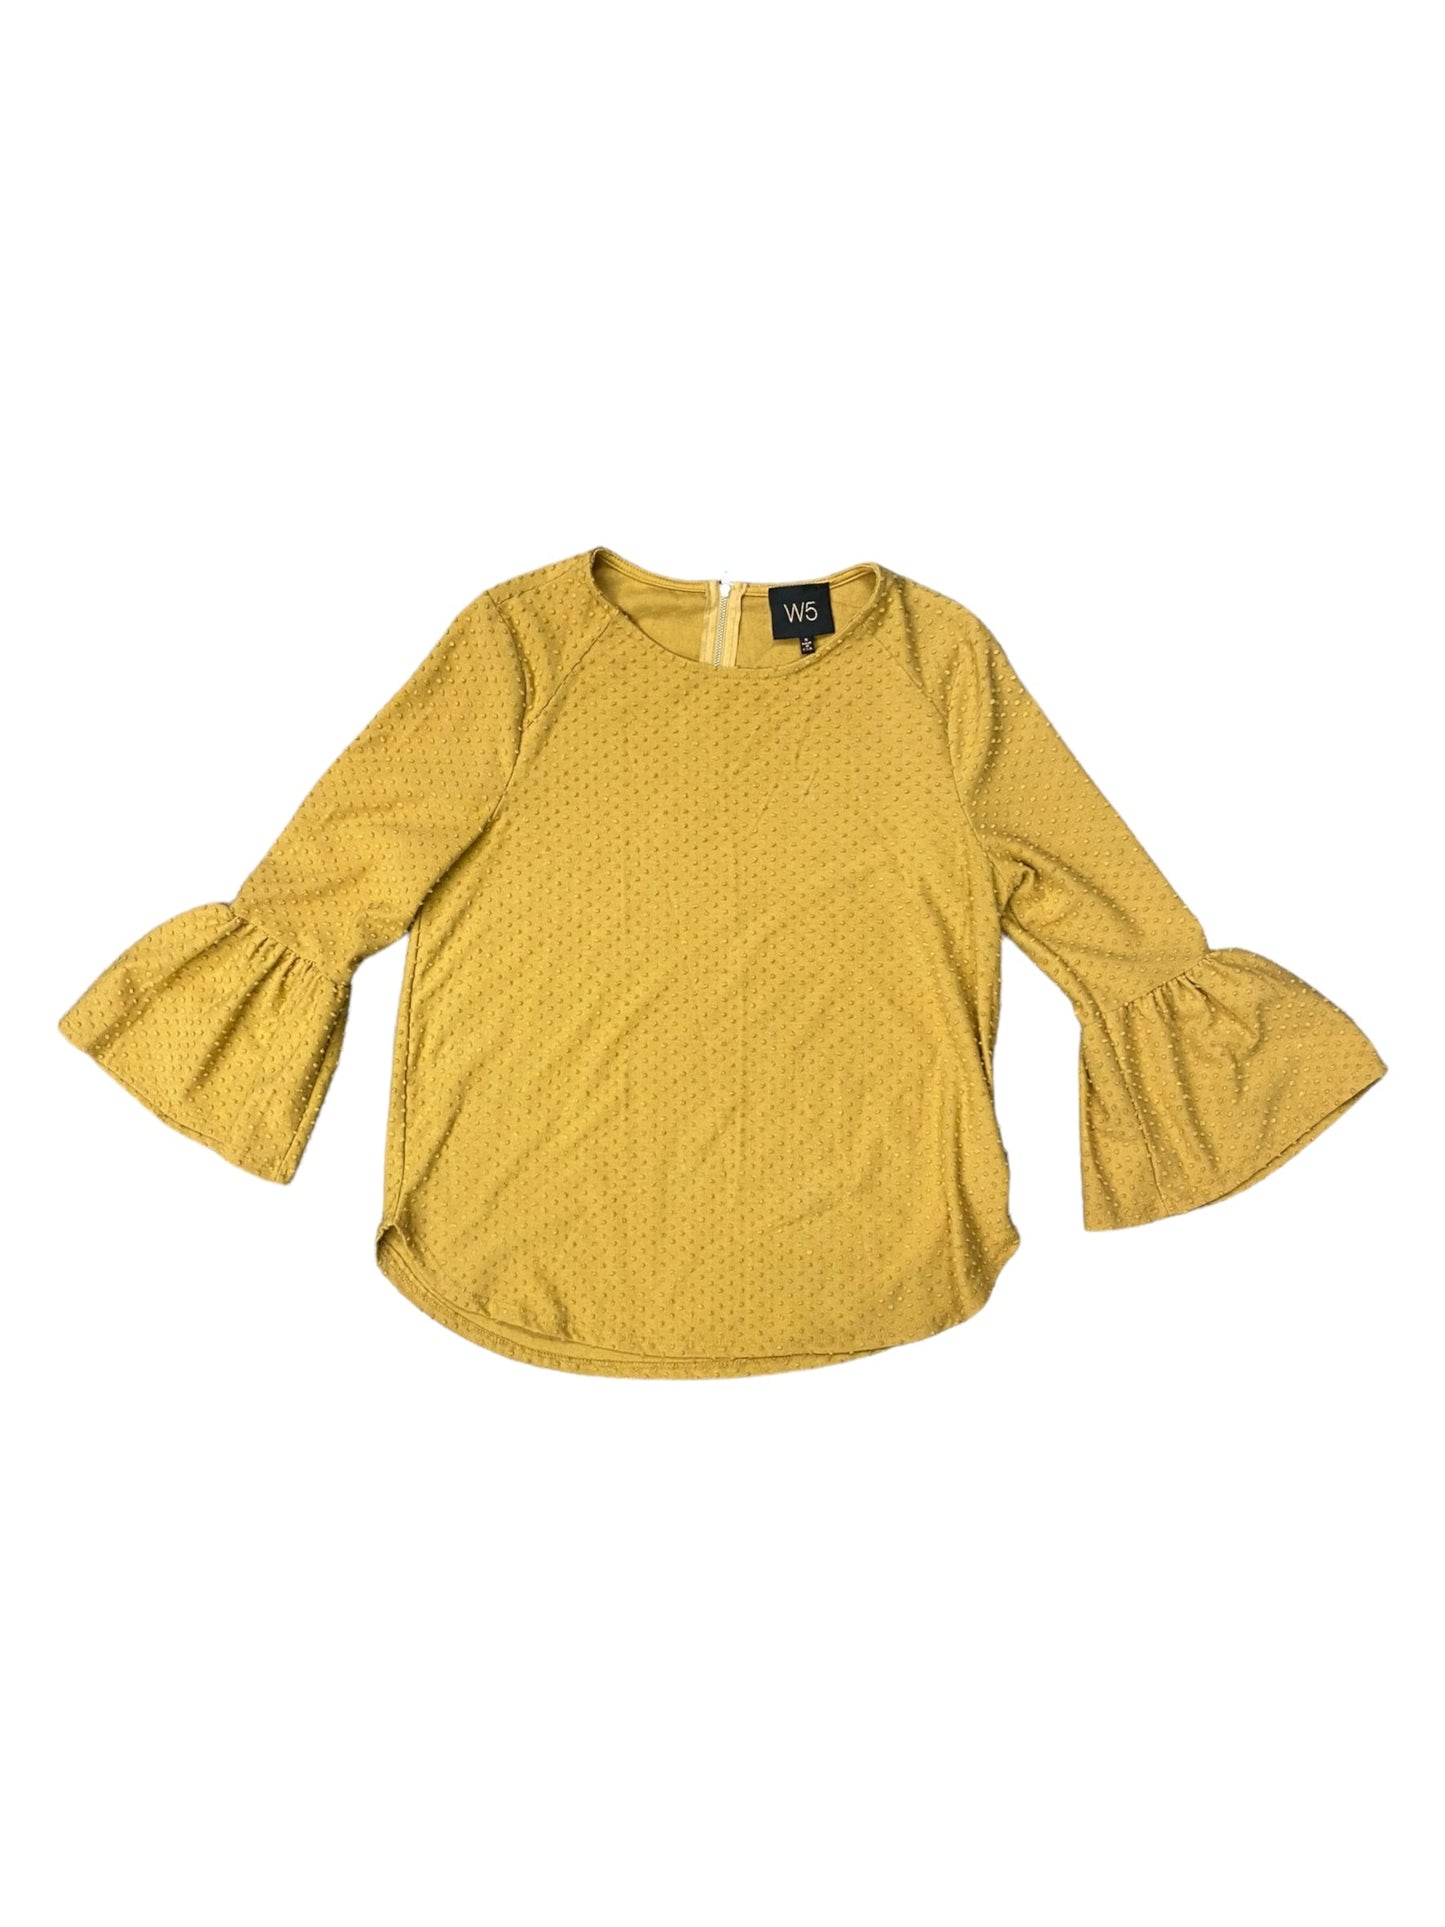 Yellow Top Long Sleeve W5, Size S